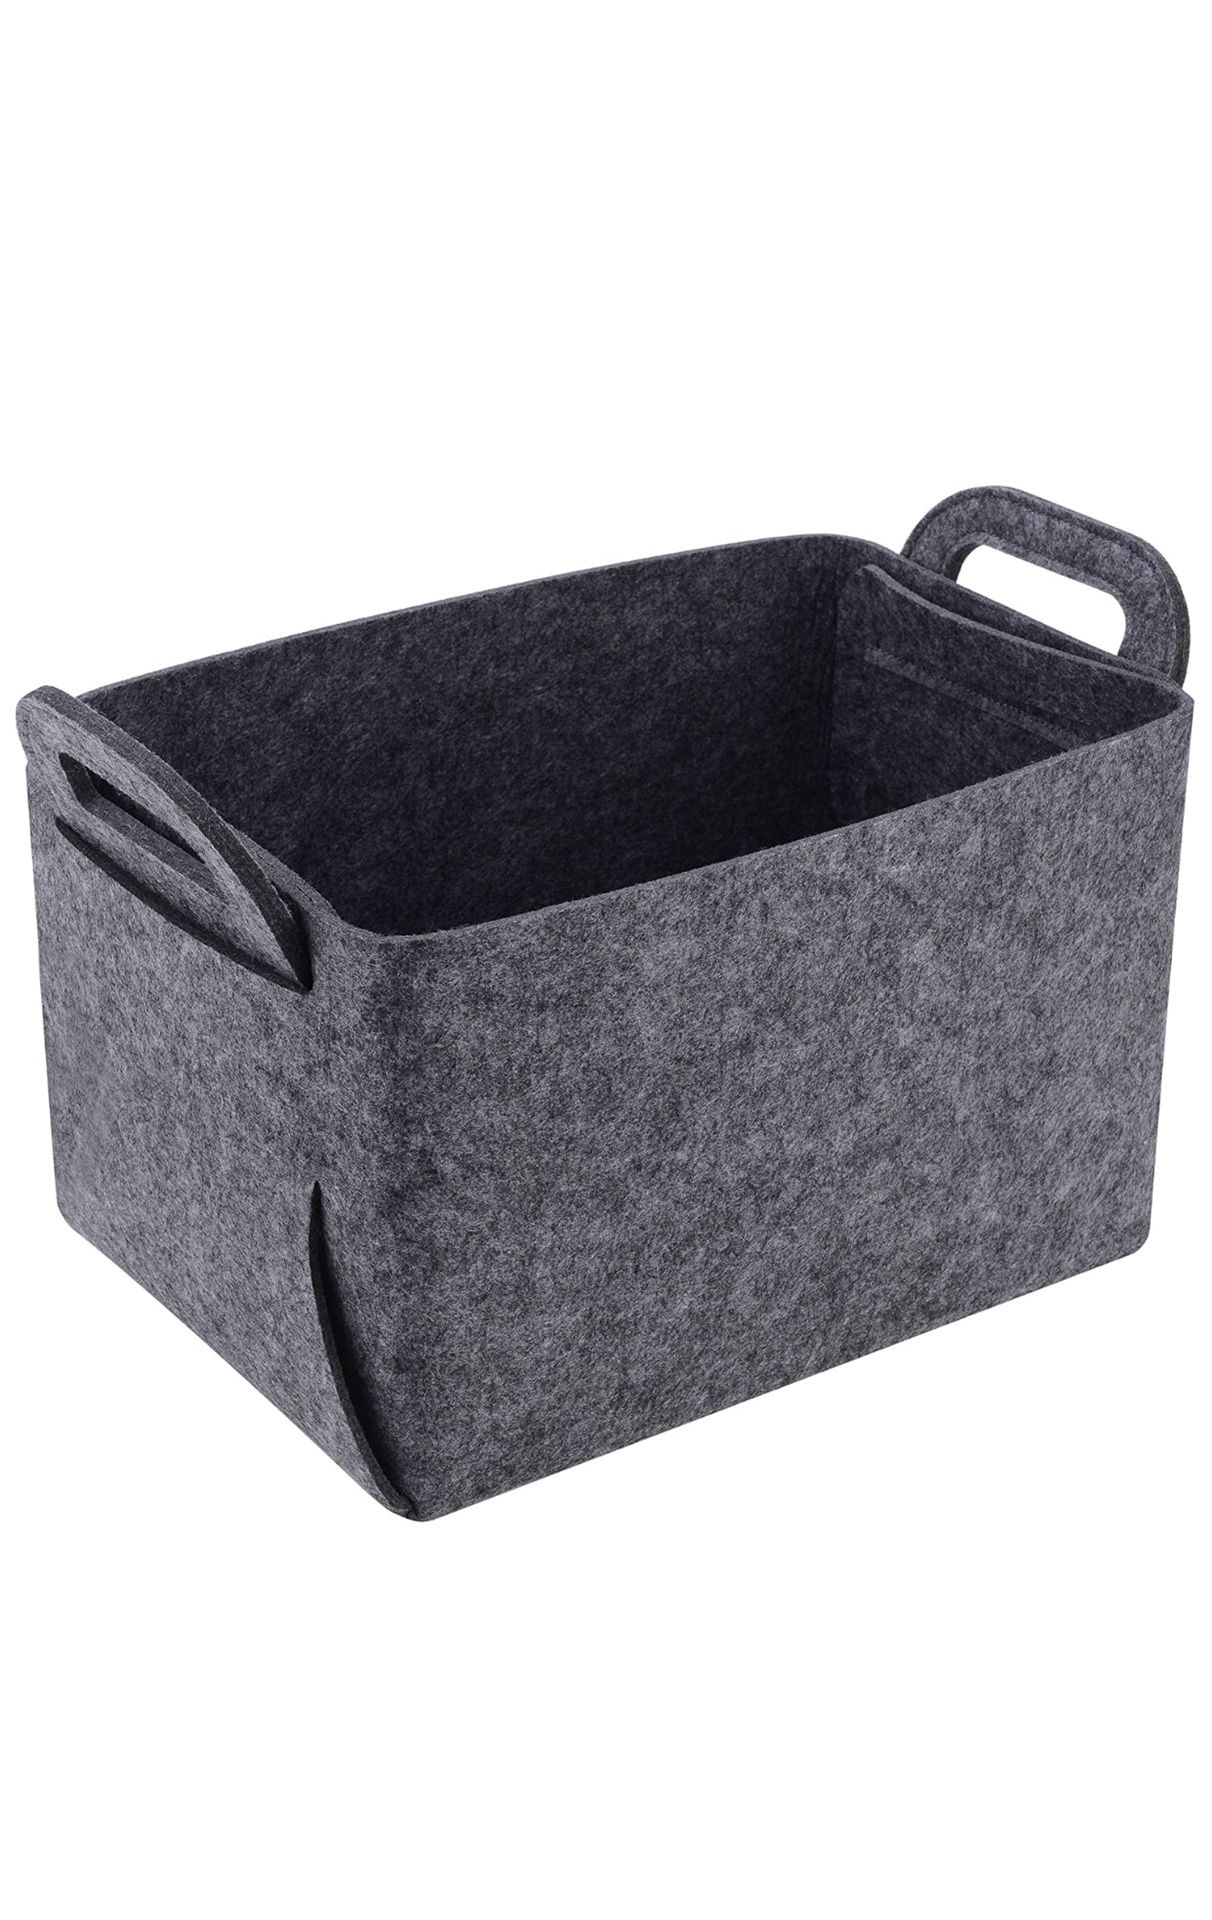 Storage Basket Felt Storage Bin Collapsible & Convenient Box Organizer with Carry Handles for Office Bedroom Closet Babies Nursery Toys DVD Laundry O